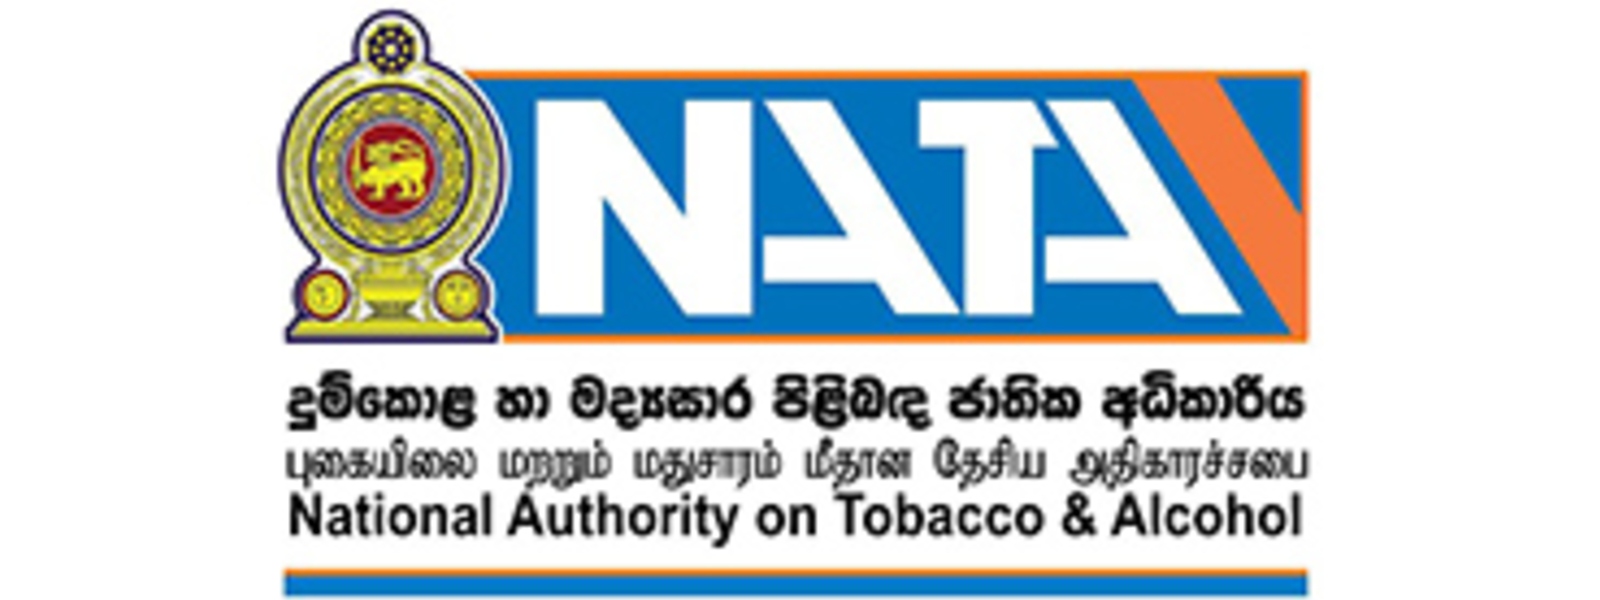 Government to impose ban on retail sale of cigarettes: NATA